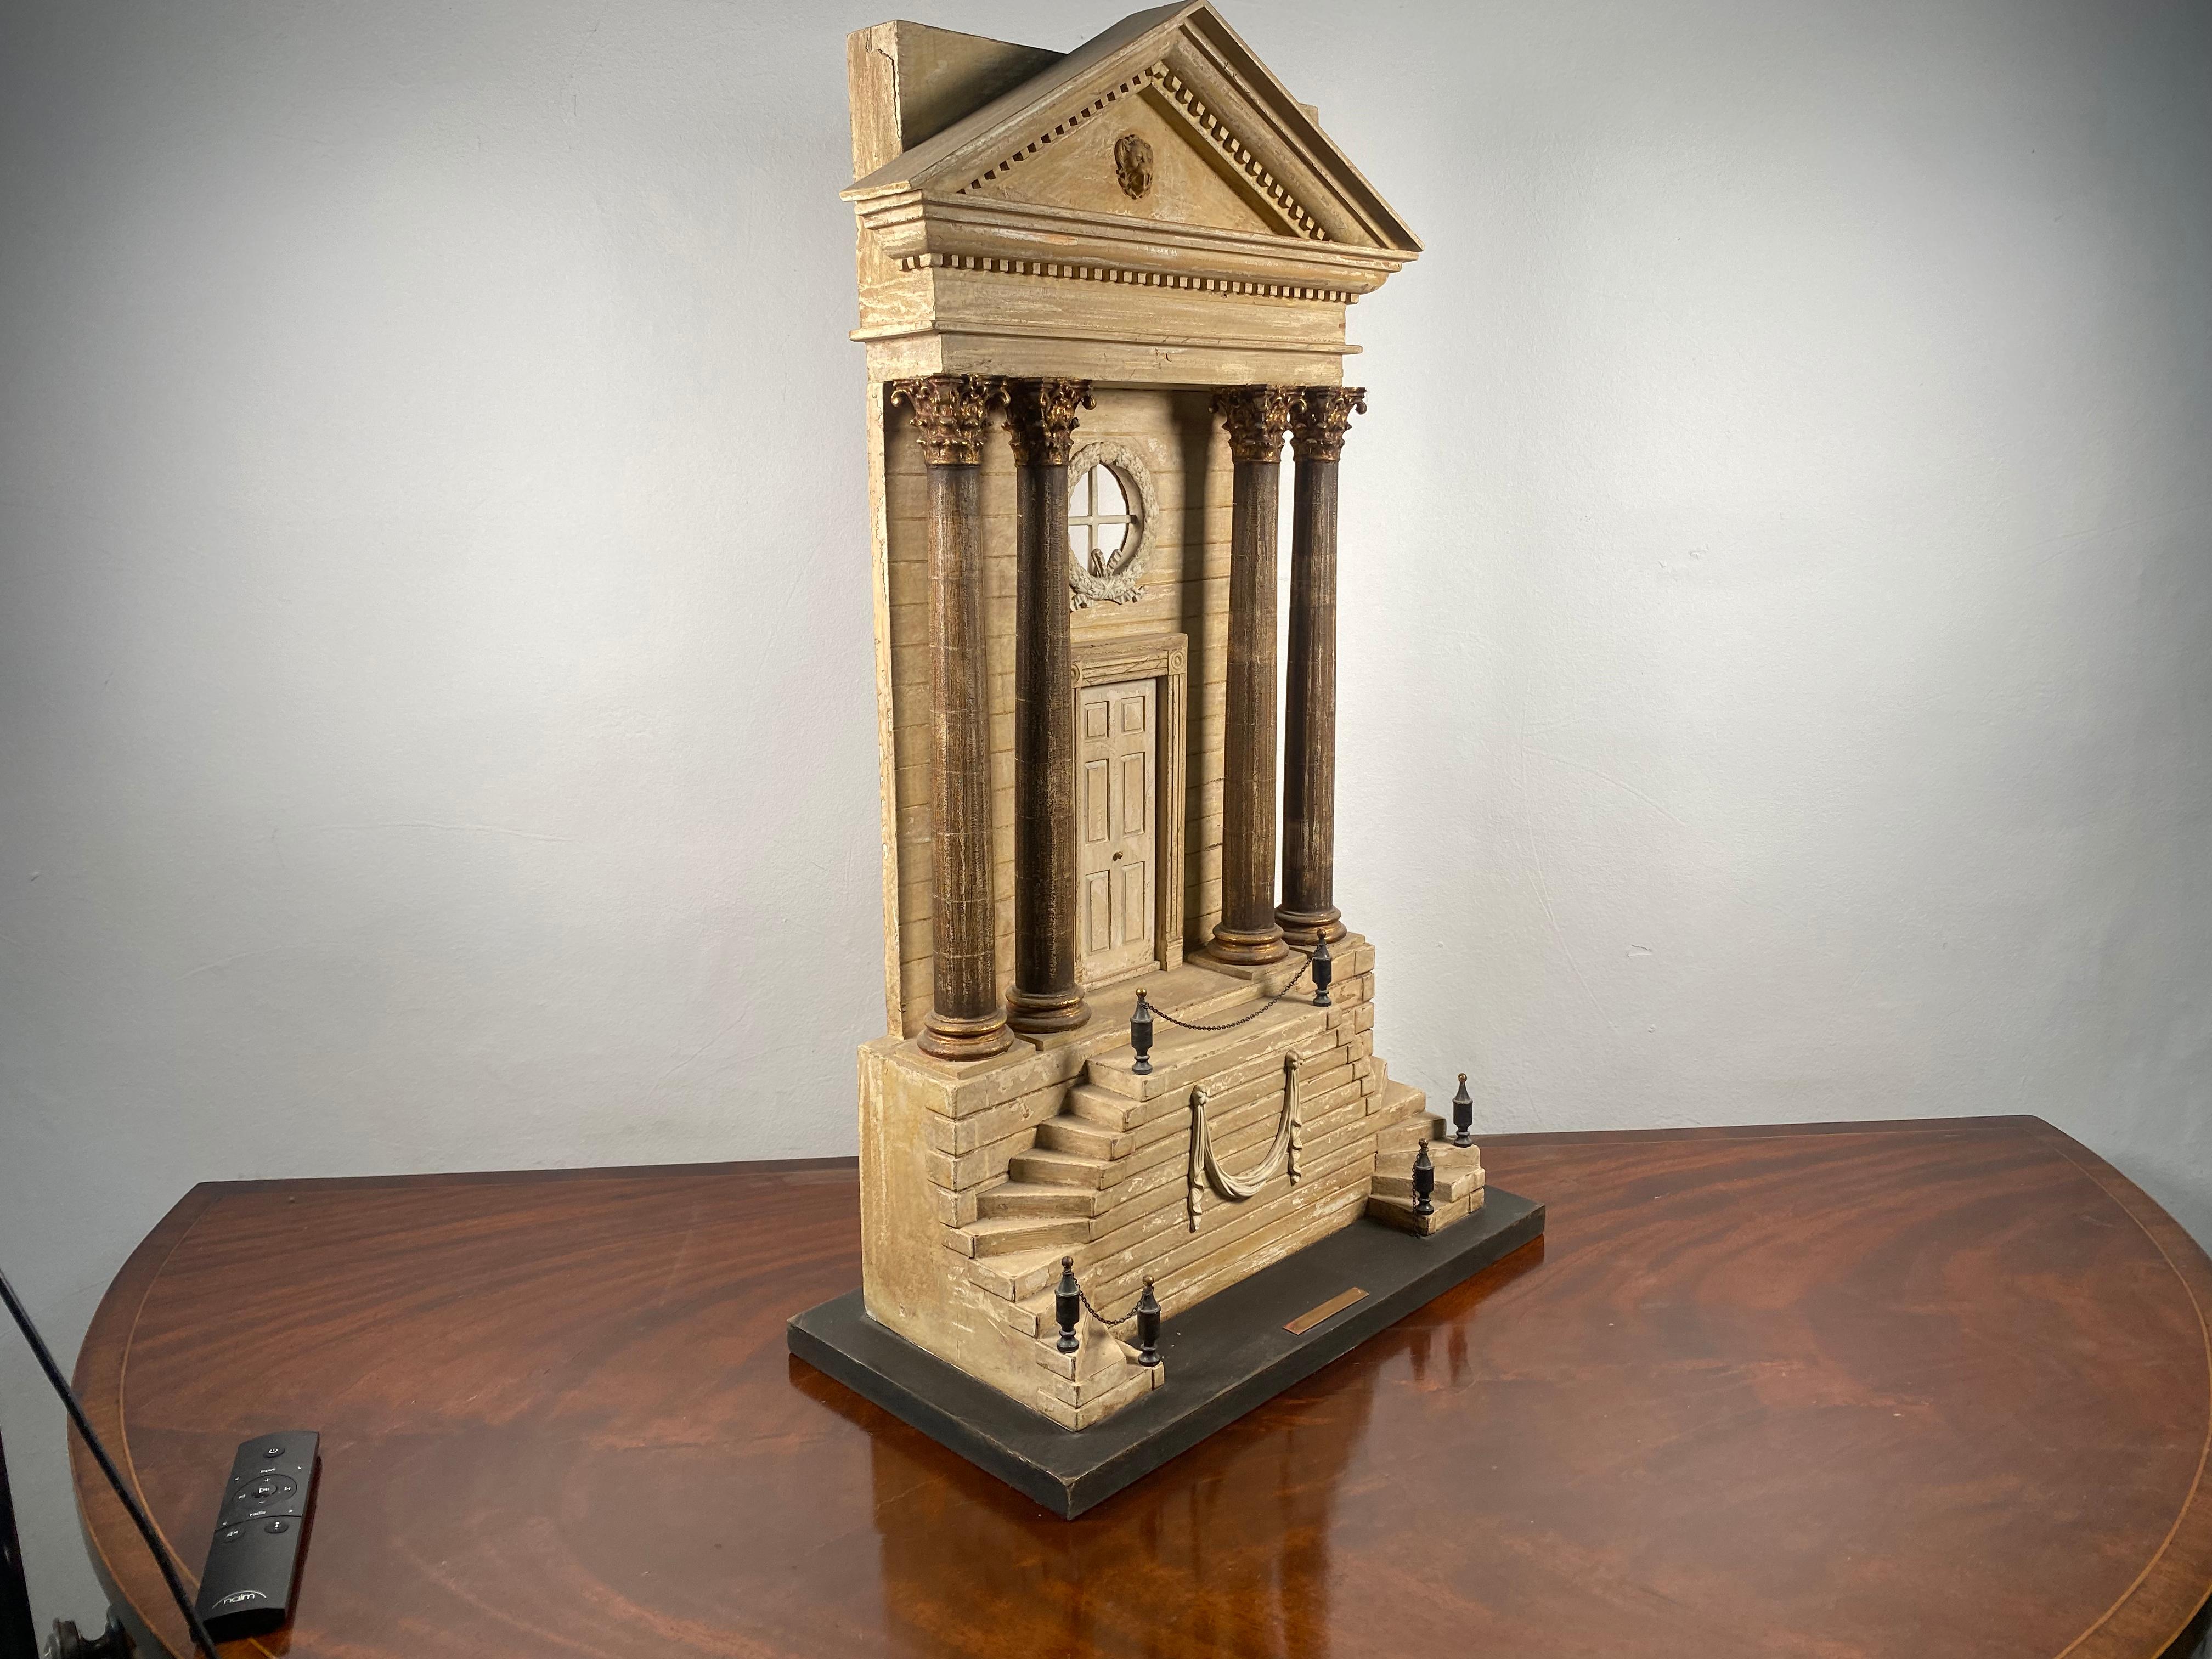 A fantastic mid 20th century model of a typically grand roman entrance. The large proportions of this piece make it a very eye-catching centre piece. Carved mostly in what seems to be a hard plaster with certain metal elements.